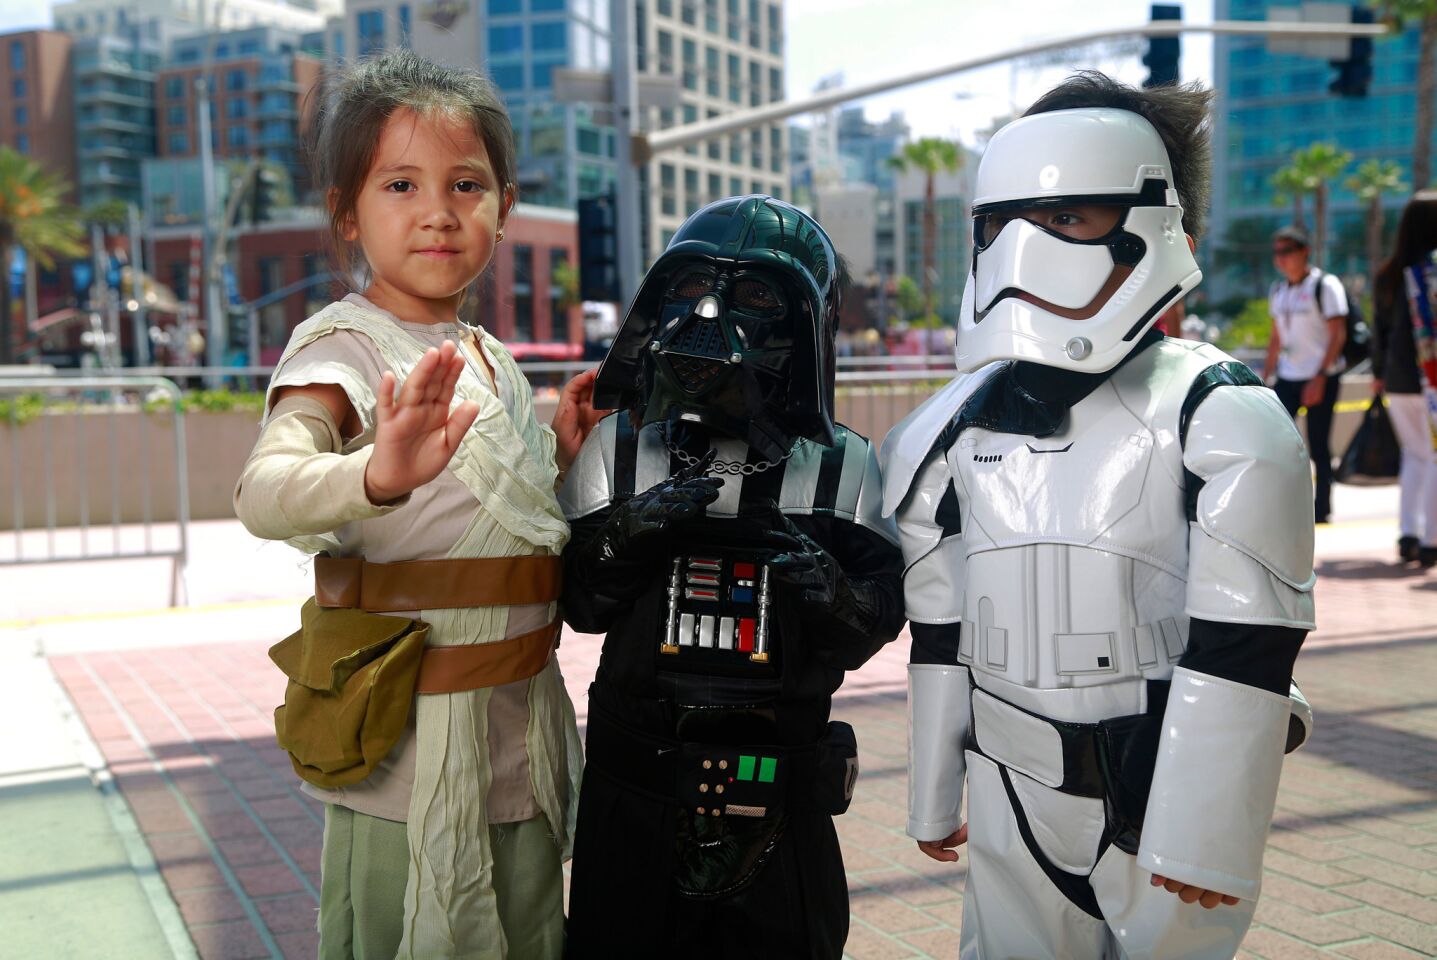 Siblings Itzel Becerra, left, Uriel Becerra and Elfego Becerra dressed as Rey, Darth Vader and a Stormtrooper from "Star Wars" at Comic-Con in San Diego on July 20.